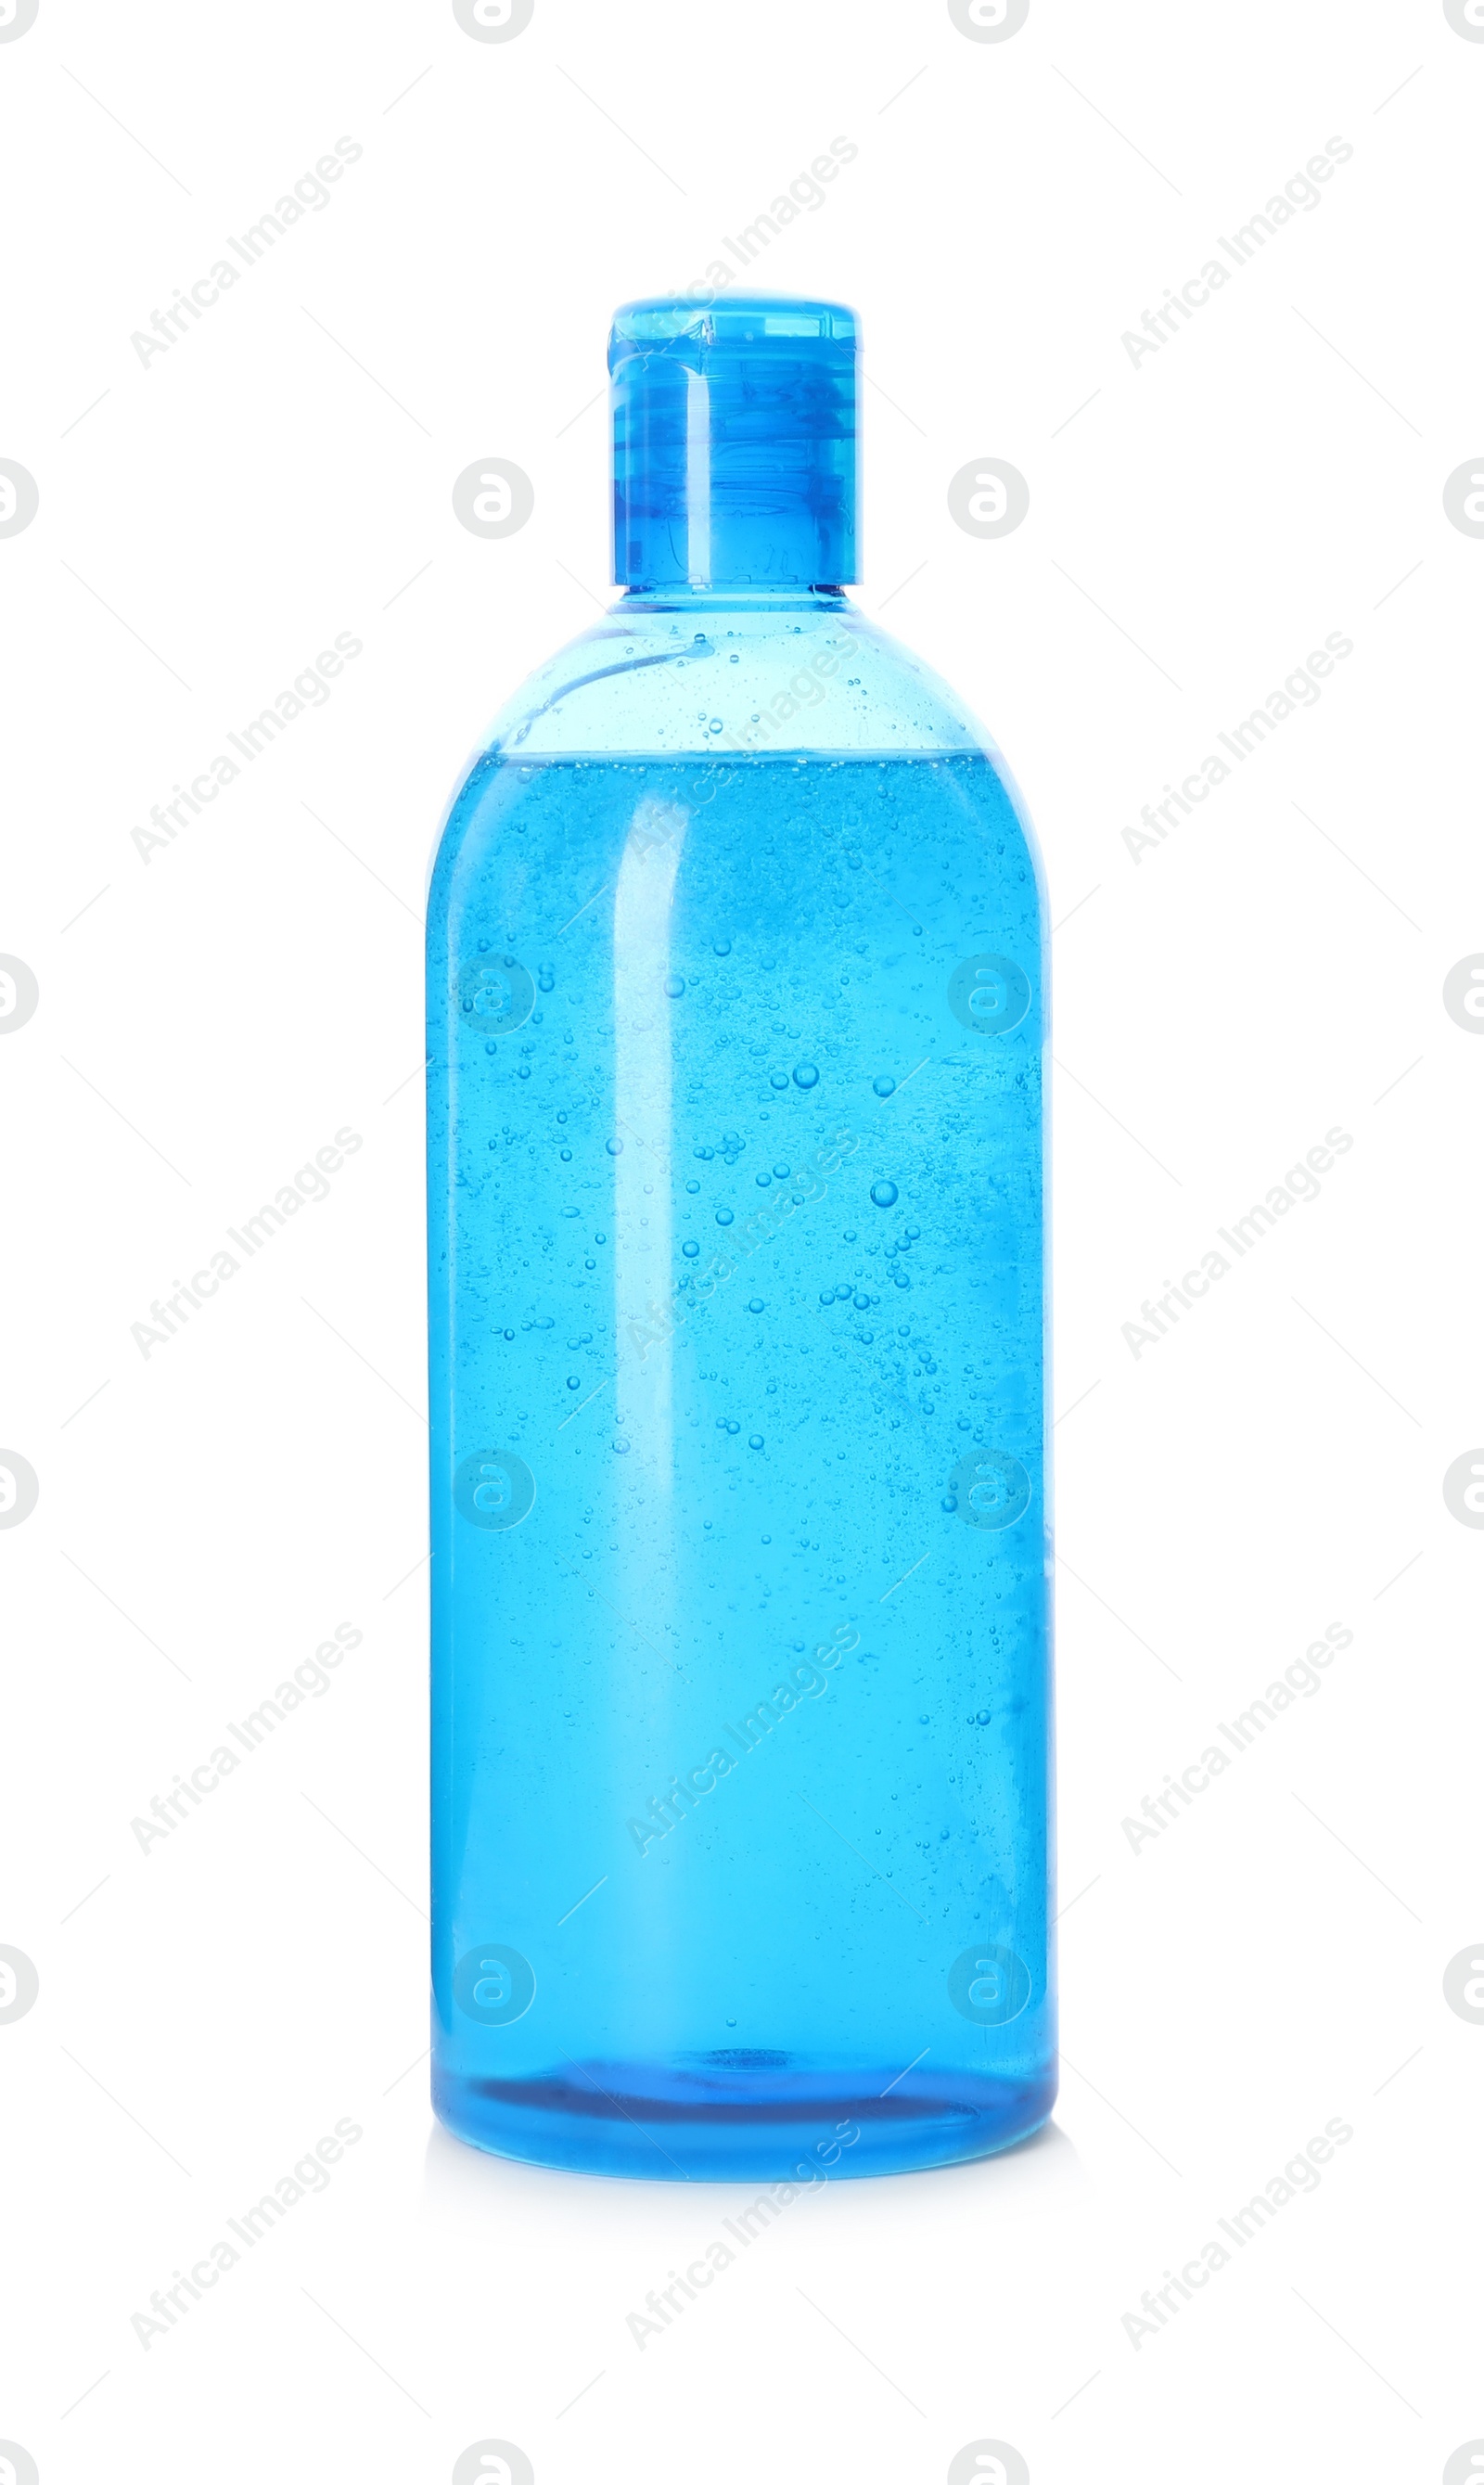 Photo of Bottle of personal hygiene product isolated on white